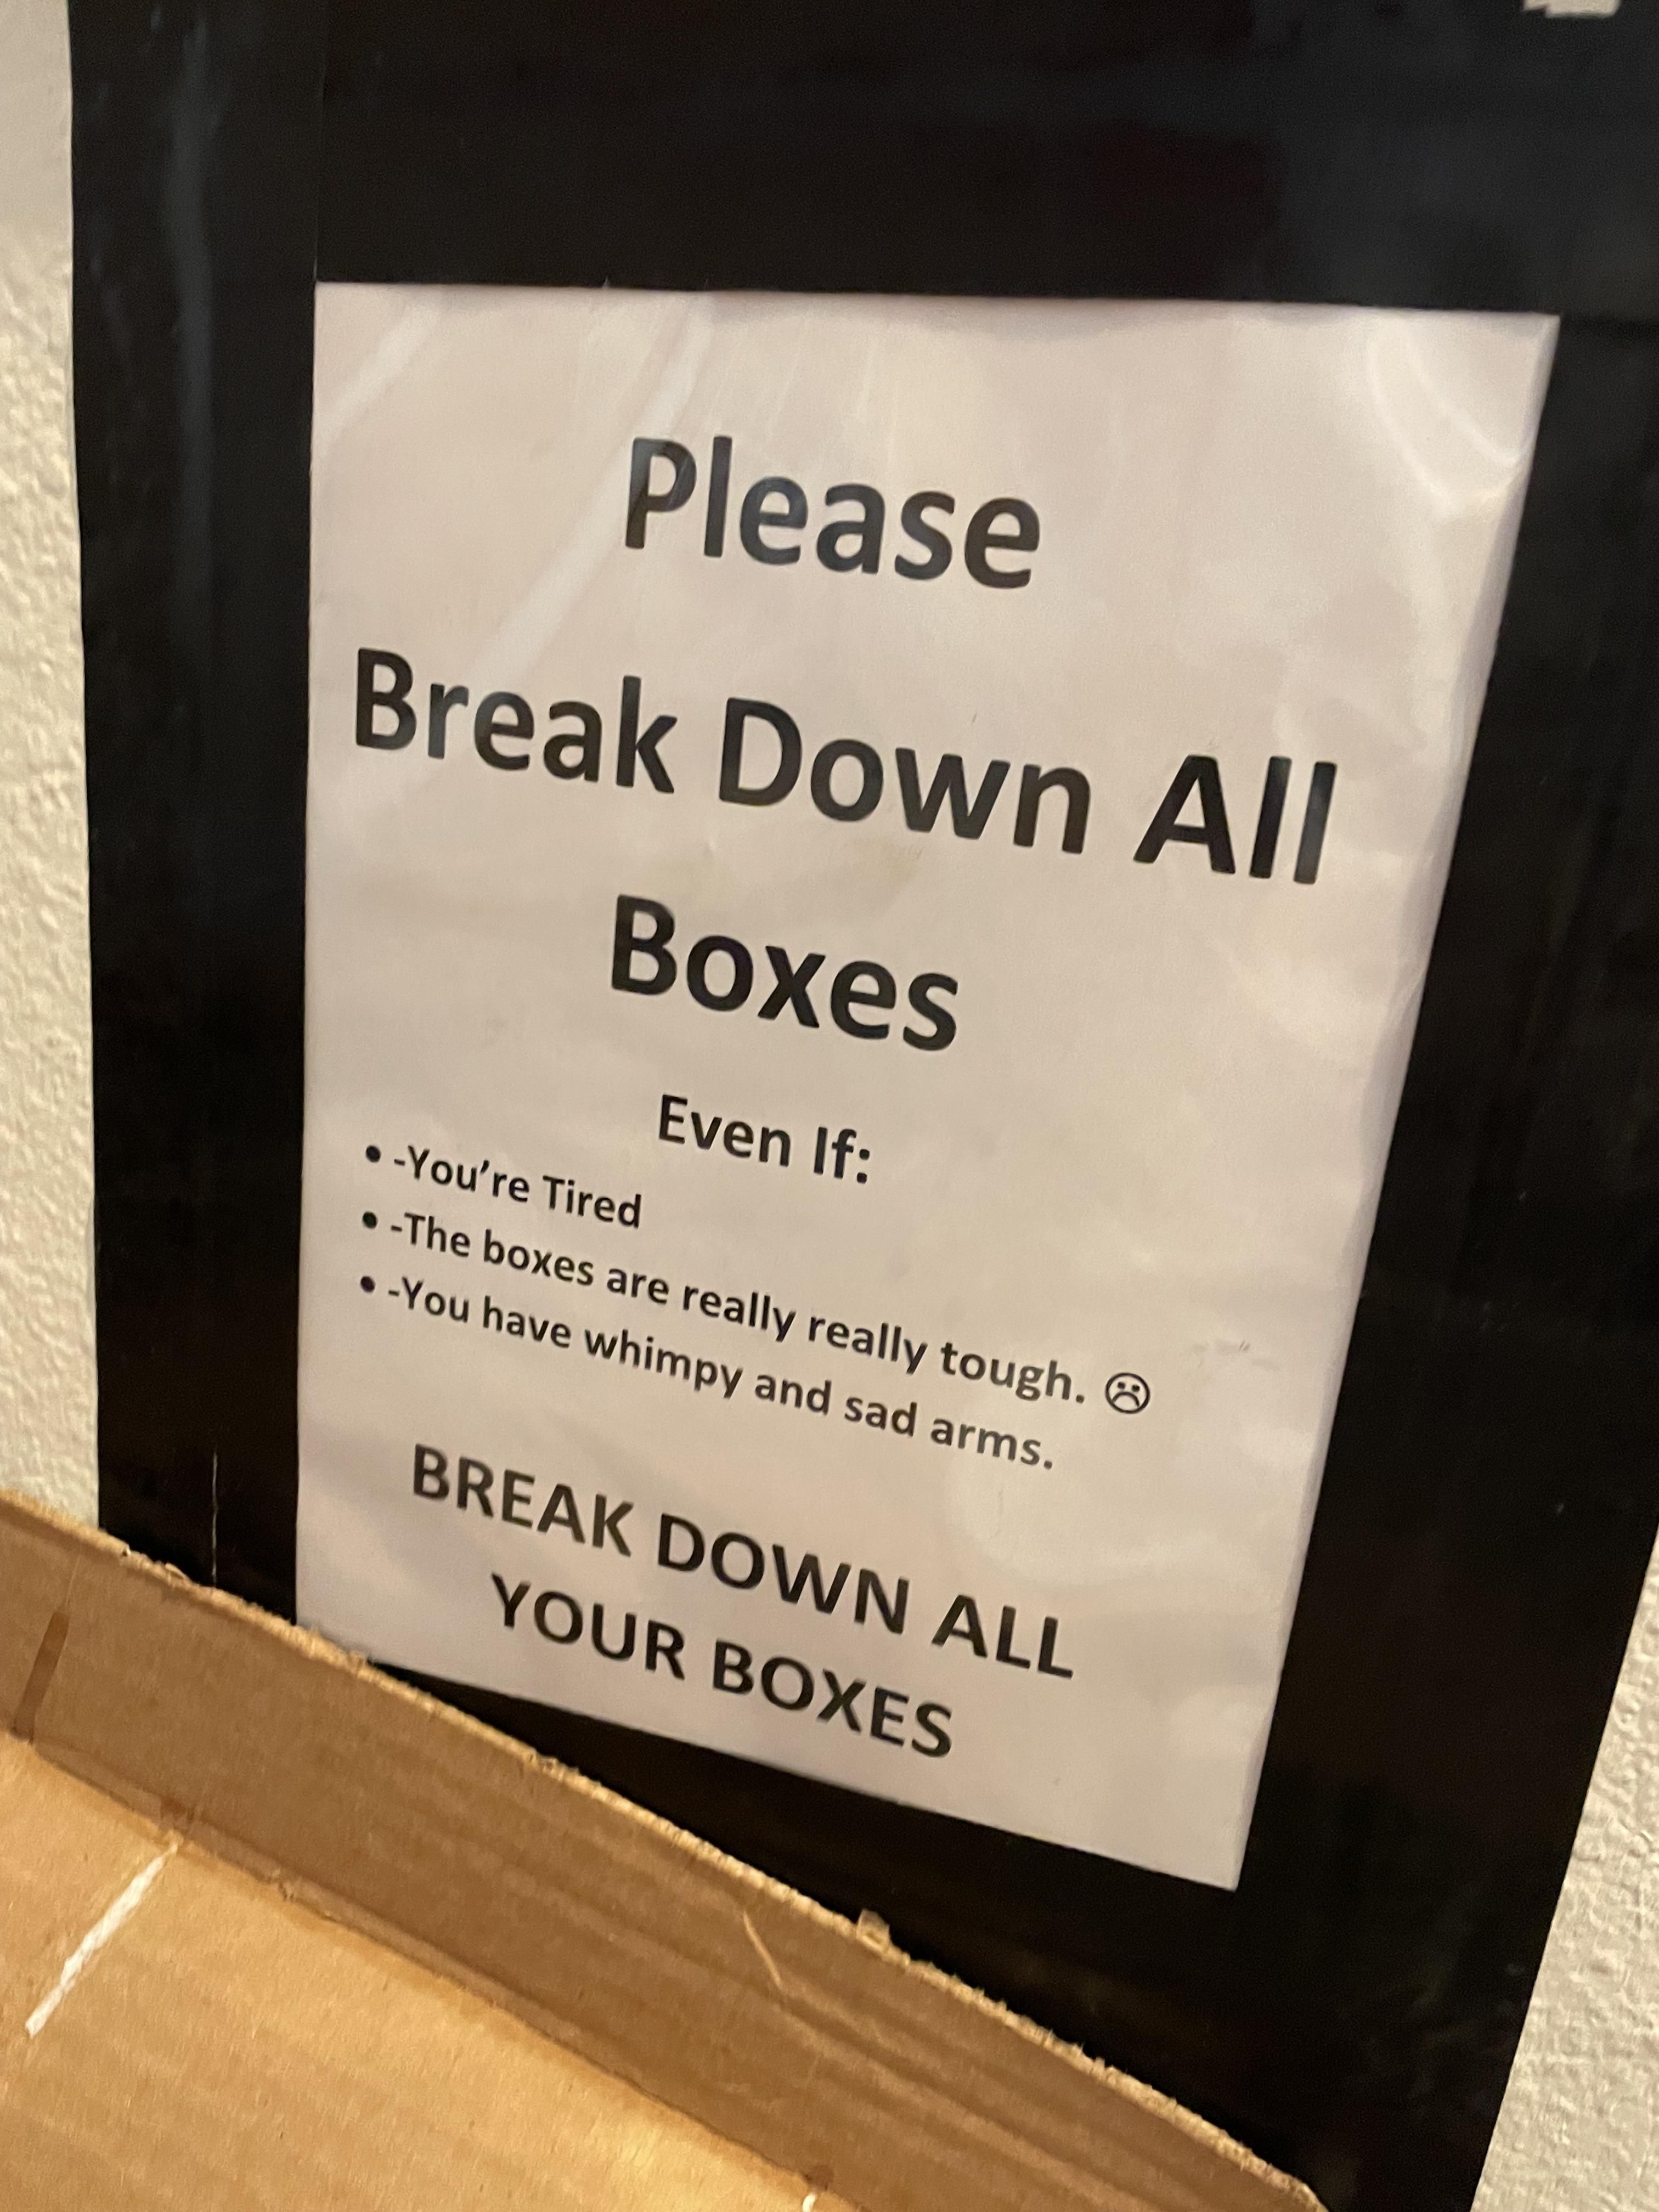 Well... they really want you to break down your boxes